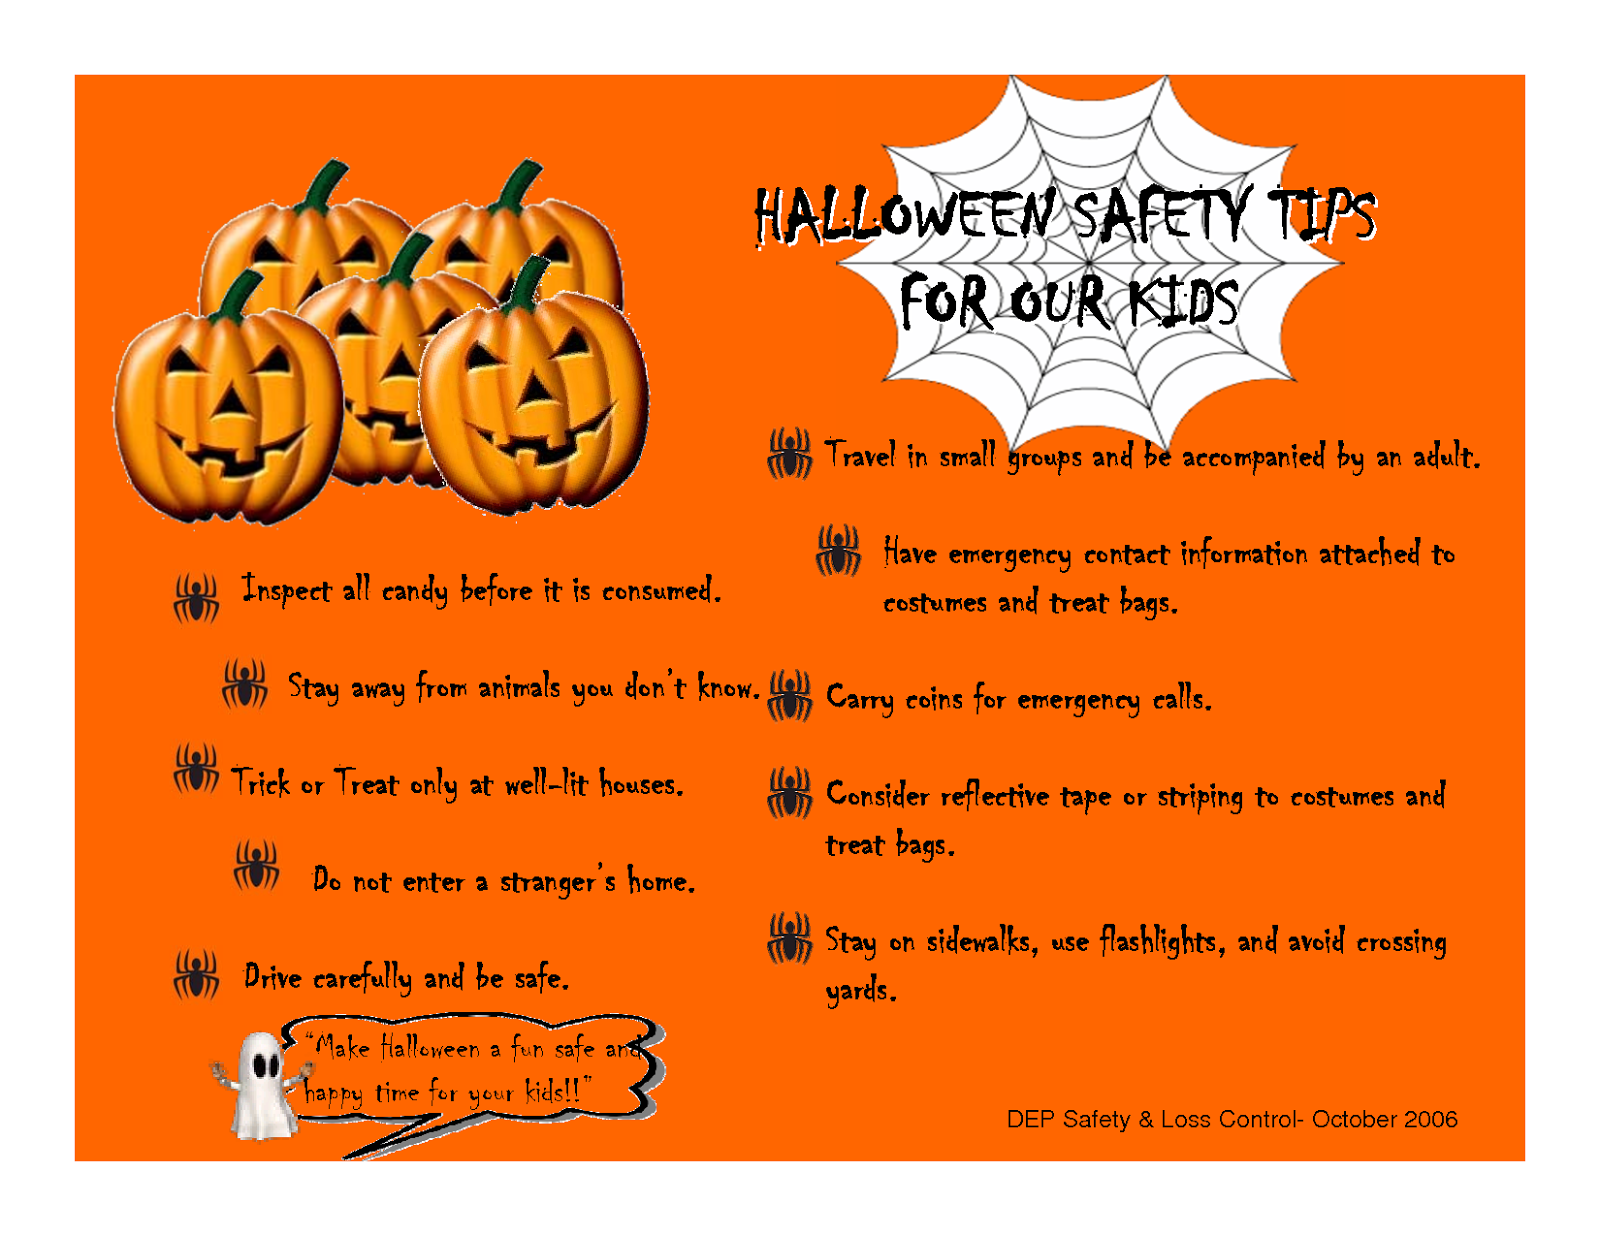 ☑ How to be safe for halloween